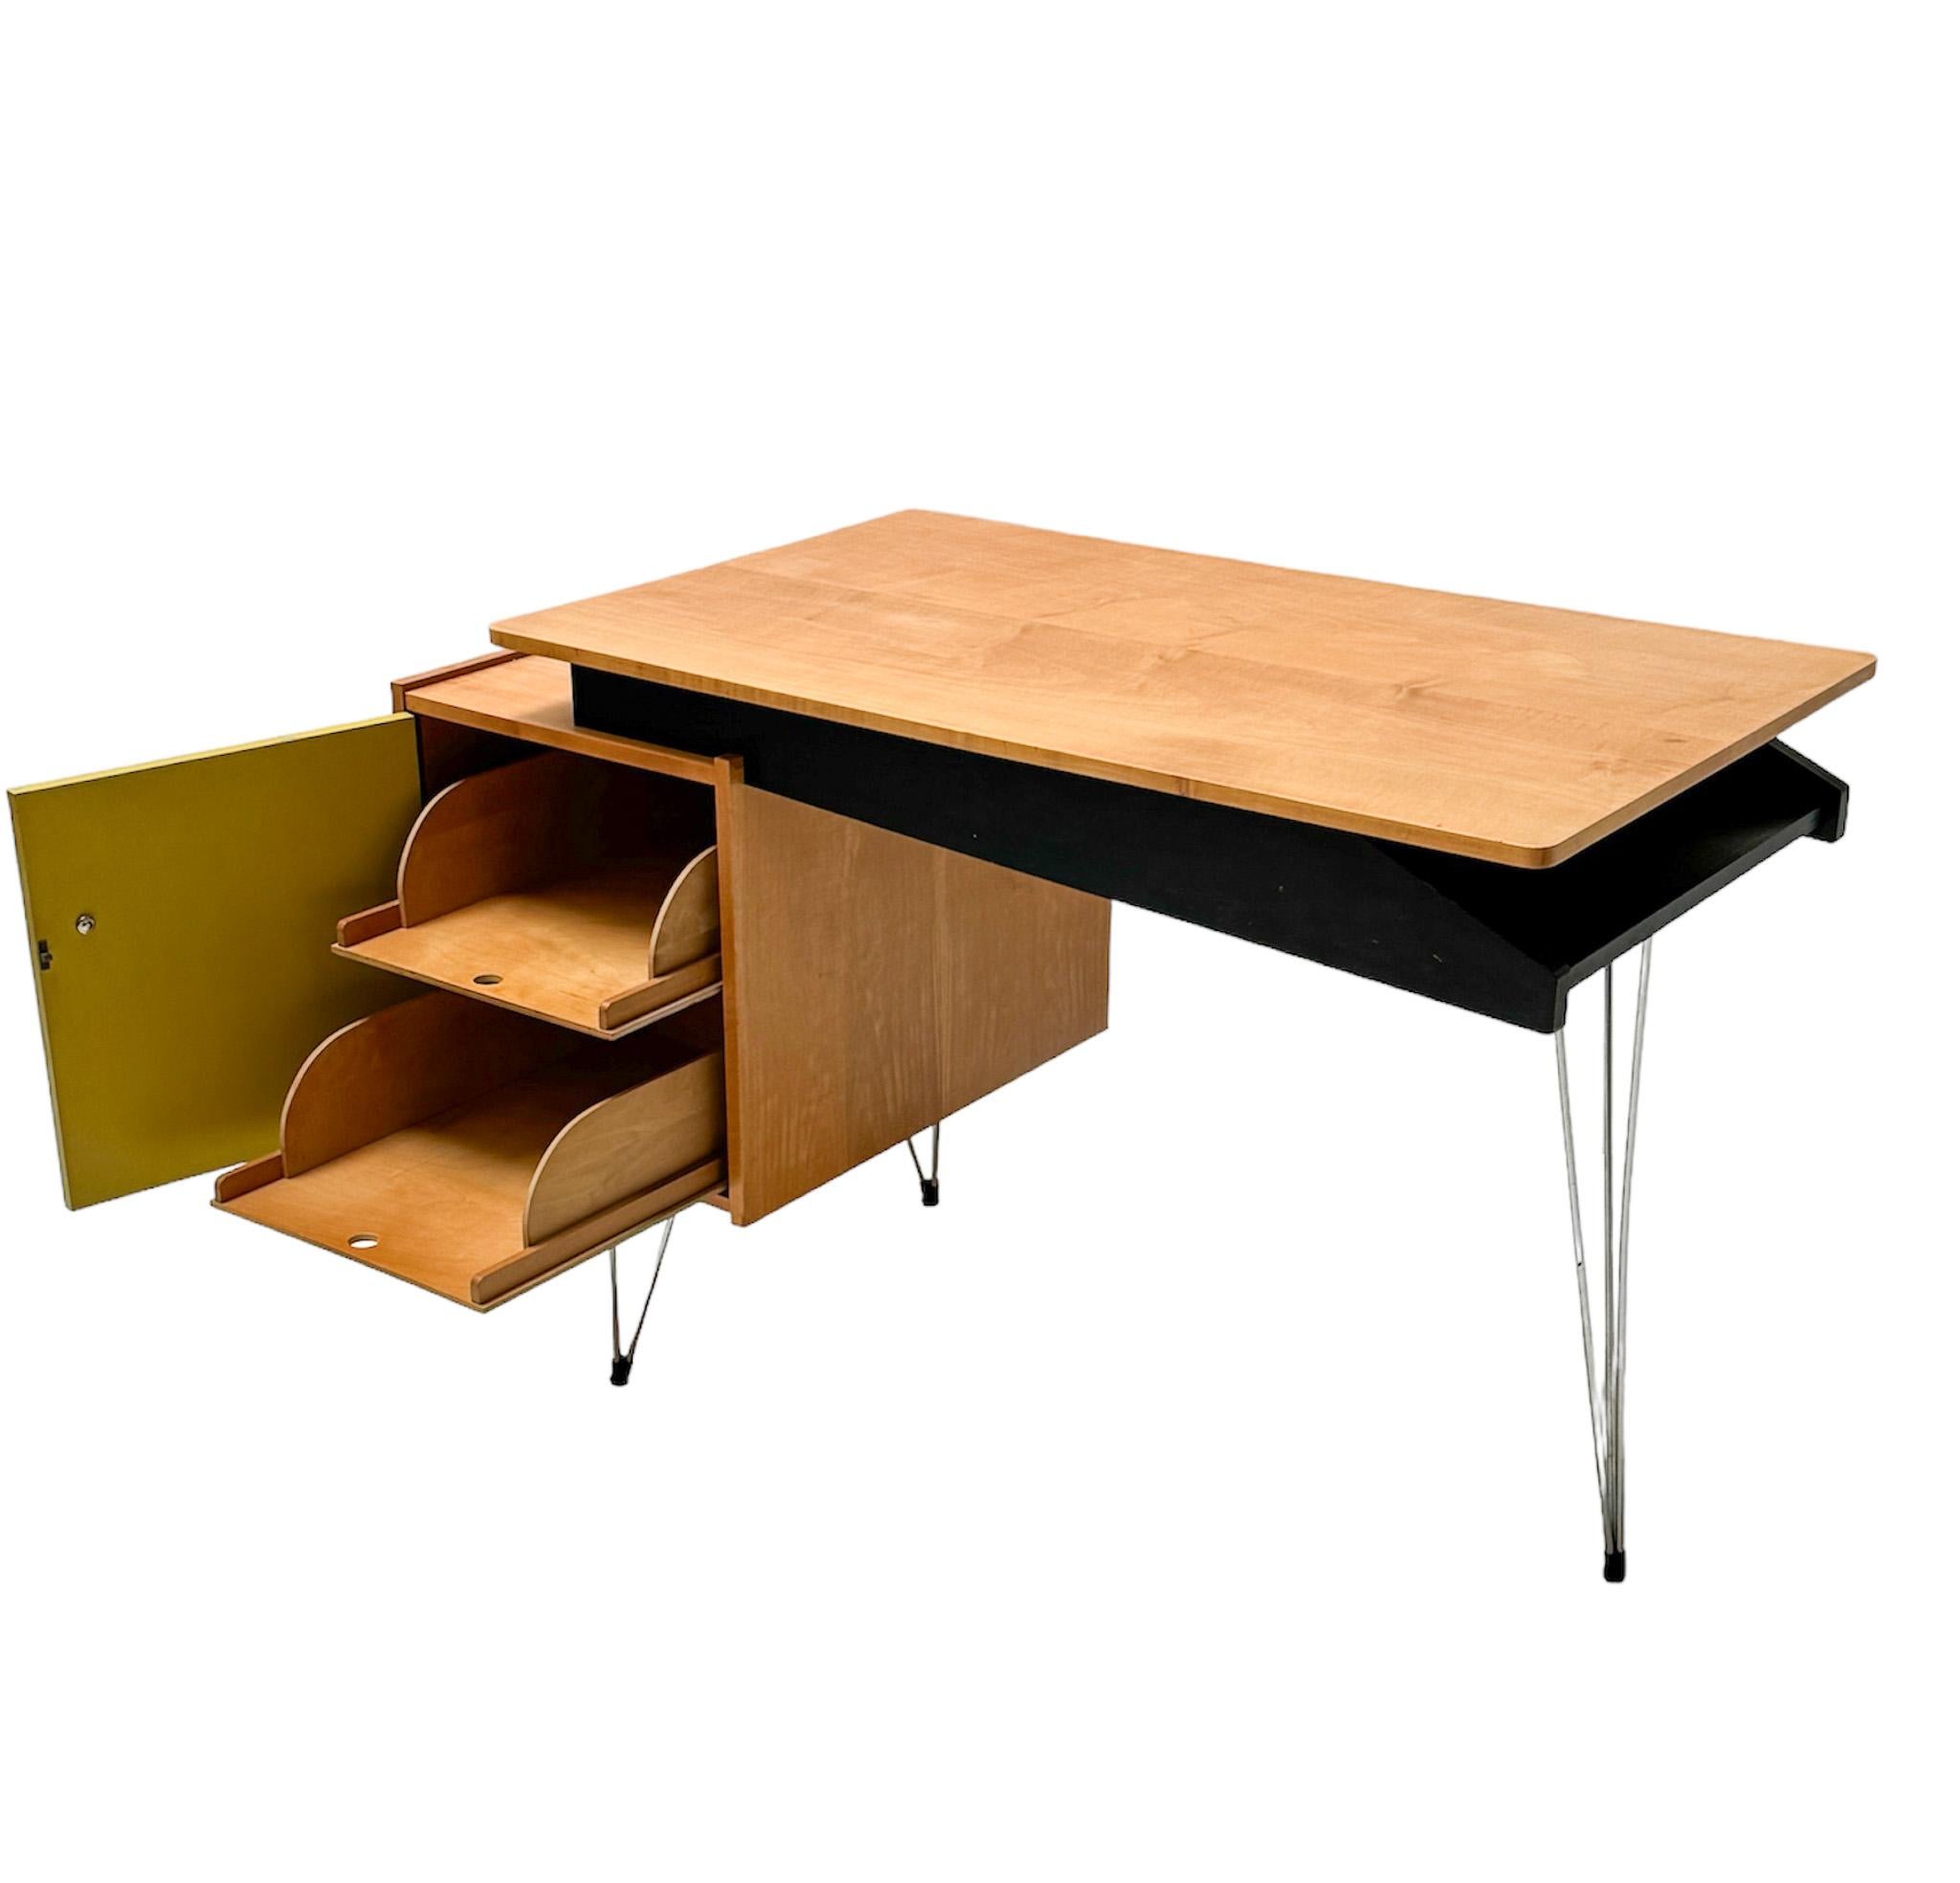 Lacquered Birch Mid-Century Modern Hairpin Desk or Writing Table by Cees Braakman Pastoe